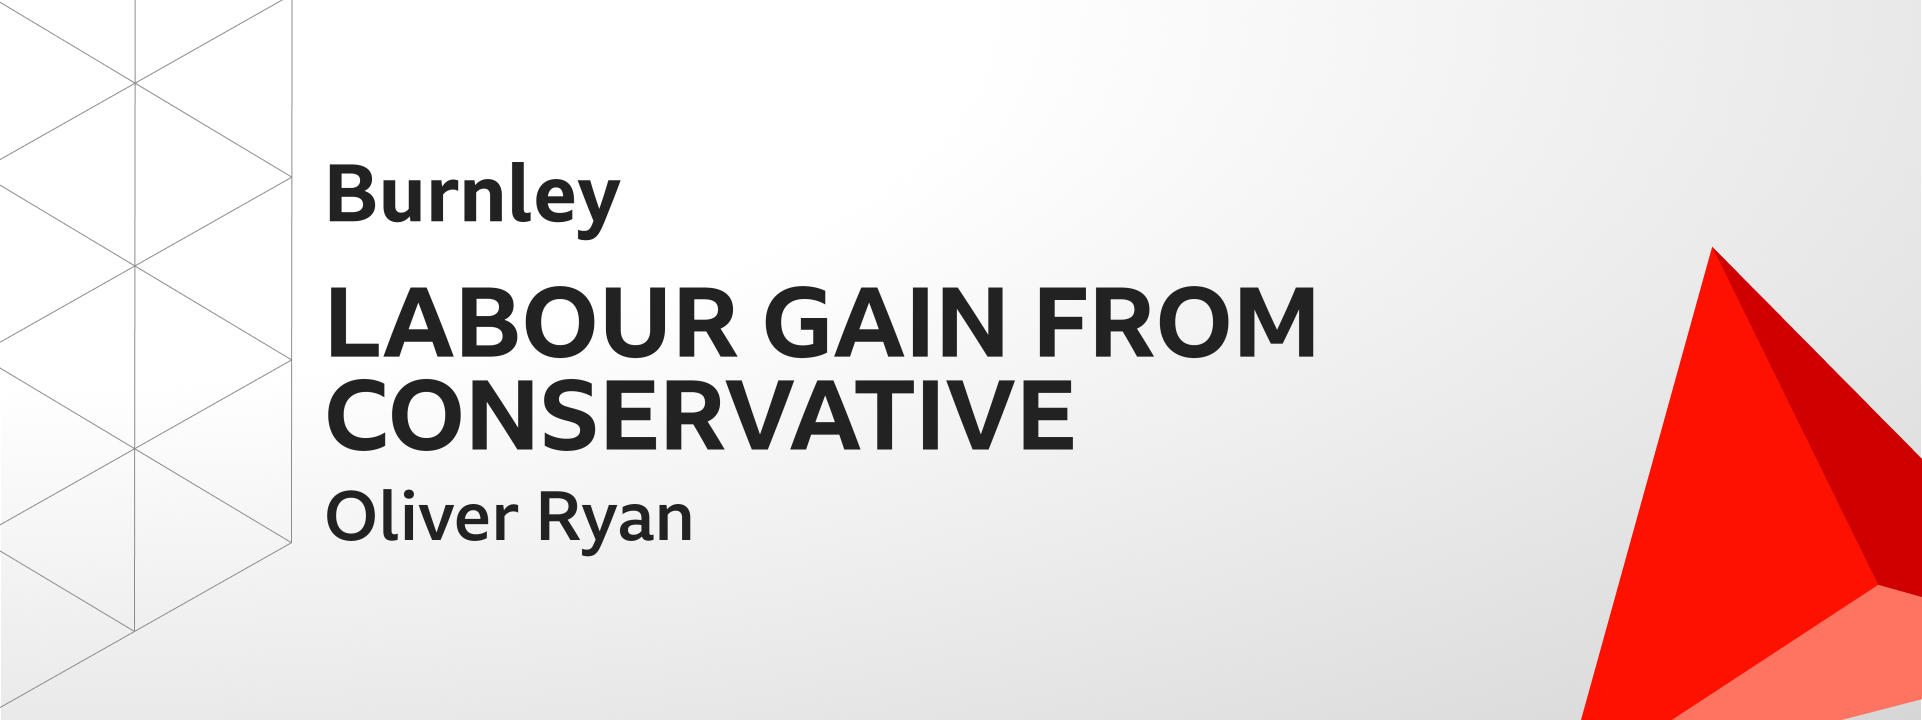 Graphic showing Labour gains Burnley from the Conservatives. The winning candidate was Oliver Ryan.